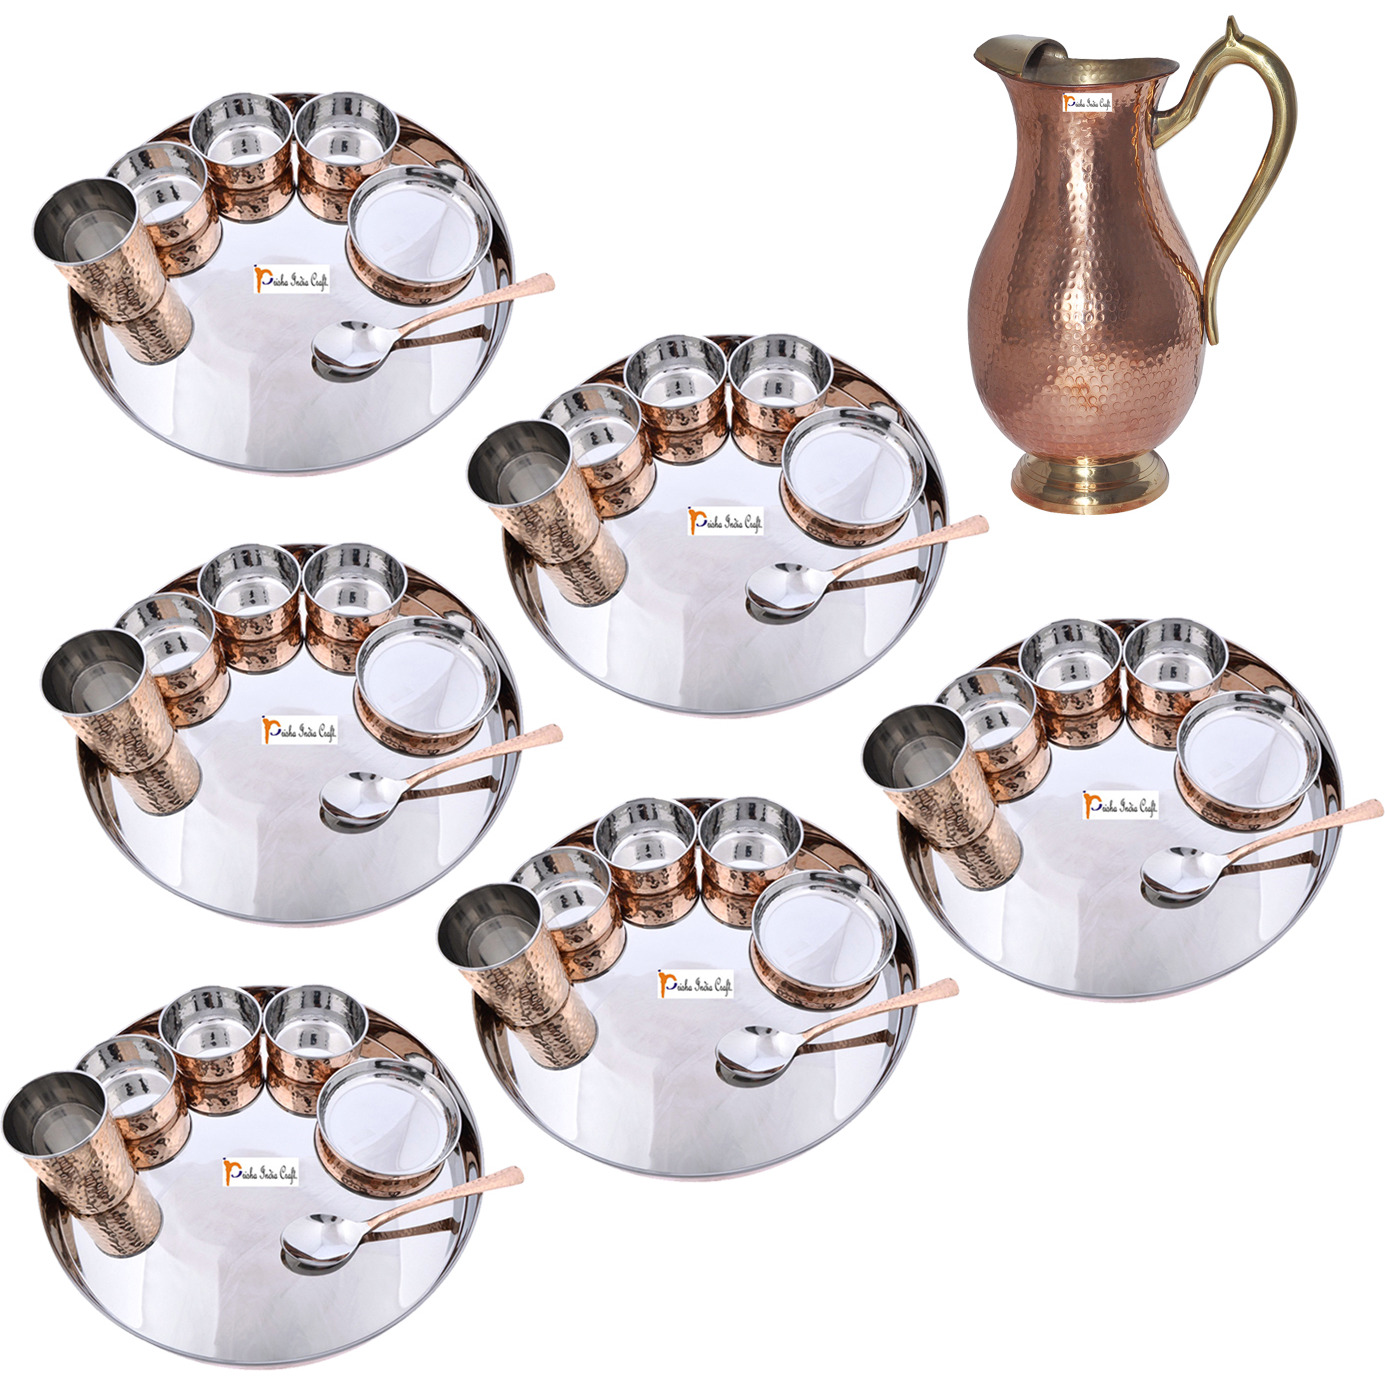 Prisha India Craft 100% Pure Copper Dinner Plate - Diameter 12 inch- Traditional Kitchen Special Thali Plate for Home Decorative